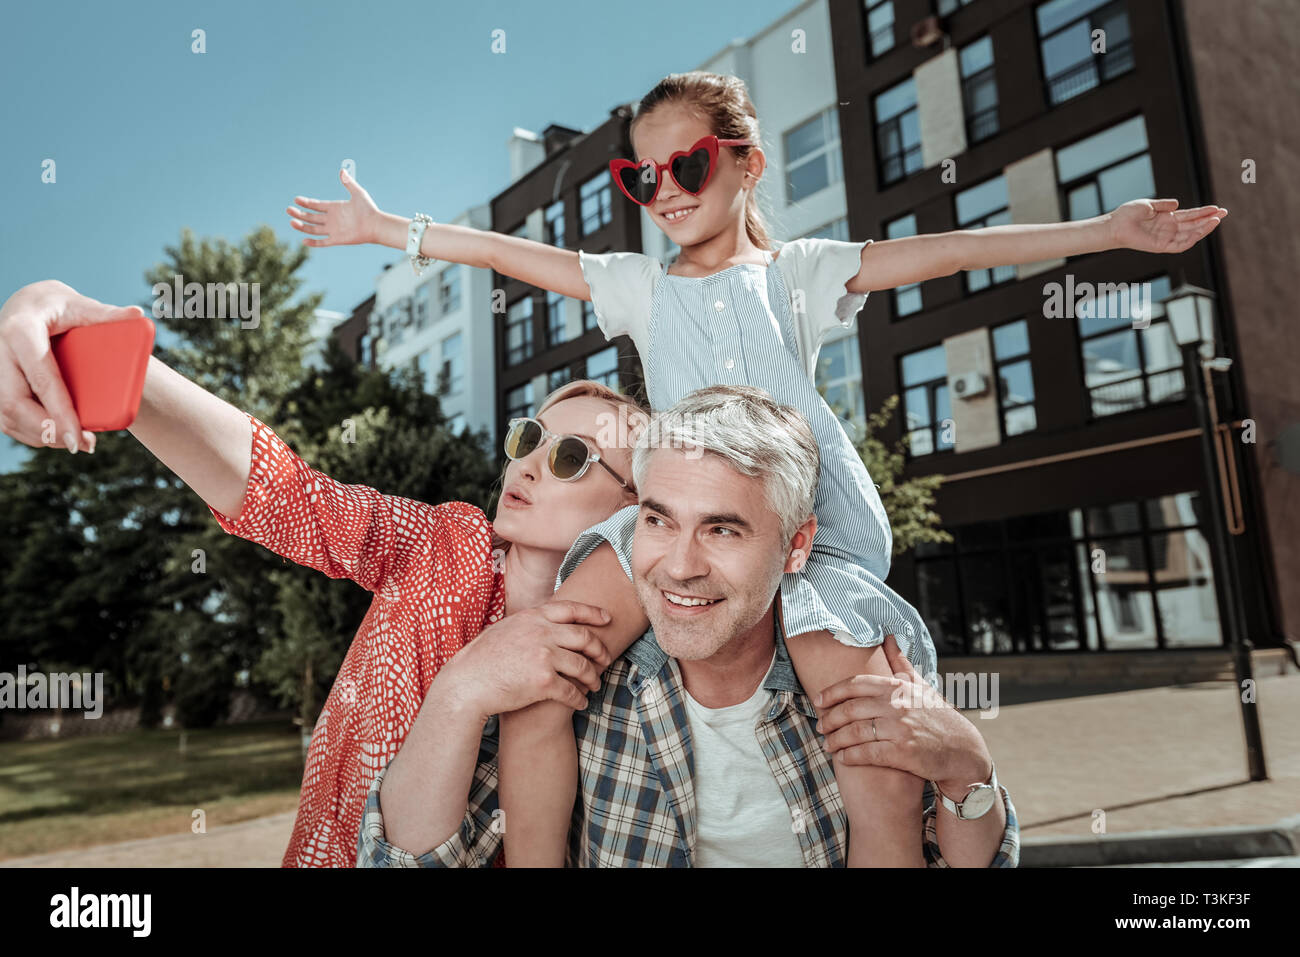 Positive happy family taking a selfie together Stock Photo